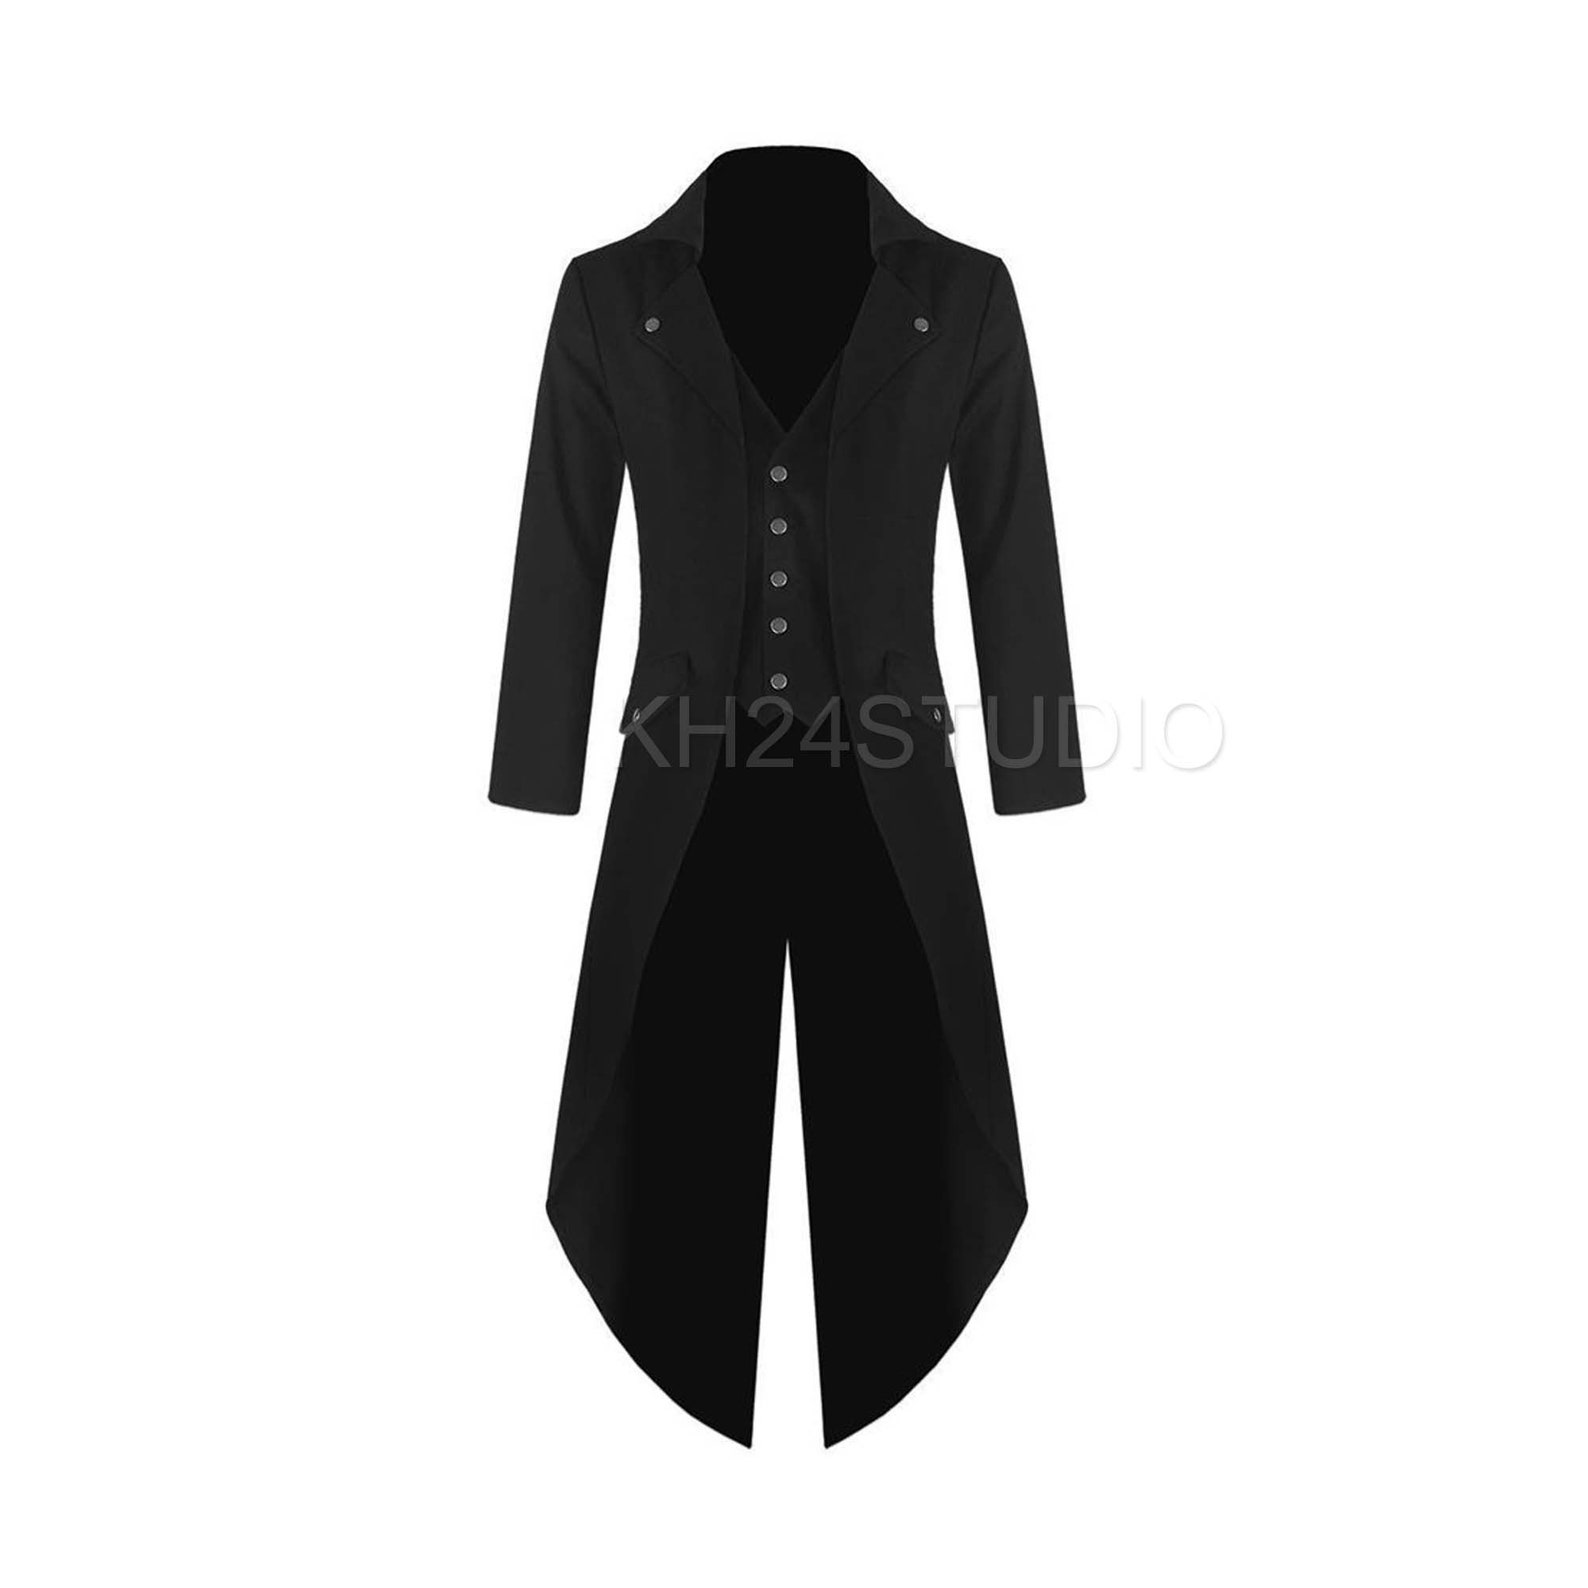 Mens Gothic Steampunk Tailcoat Victorian Goth Tailcoat Jacket - Etsy